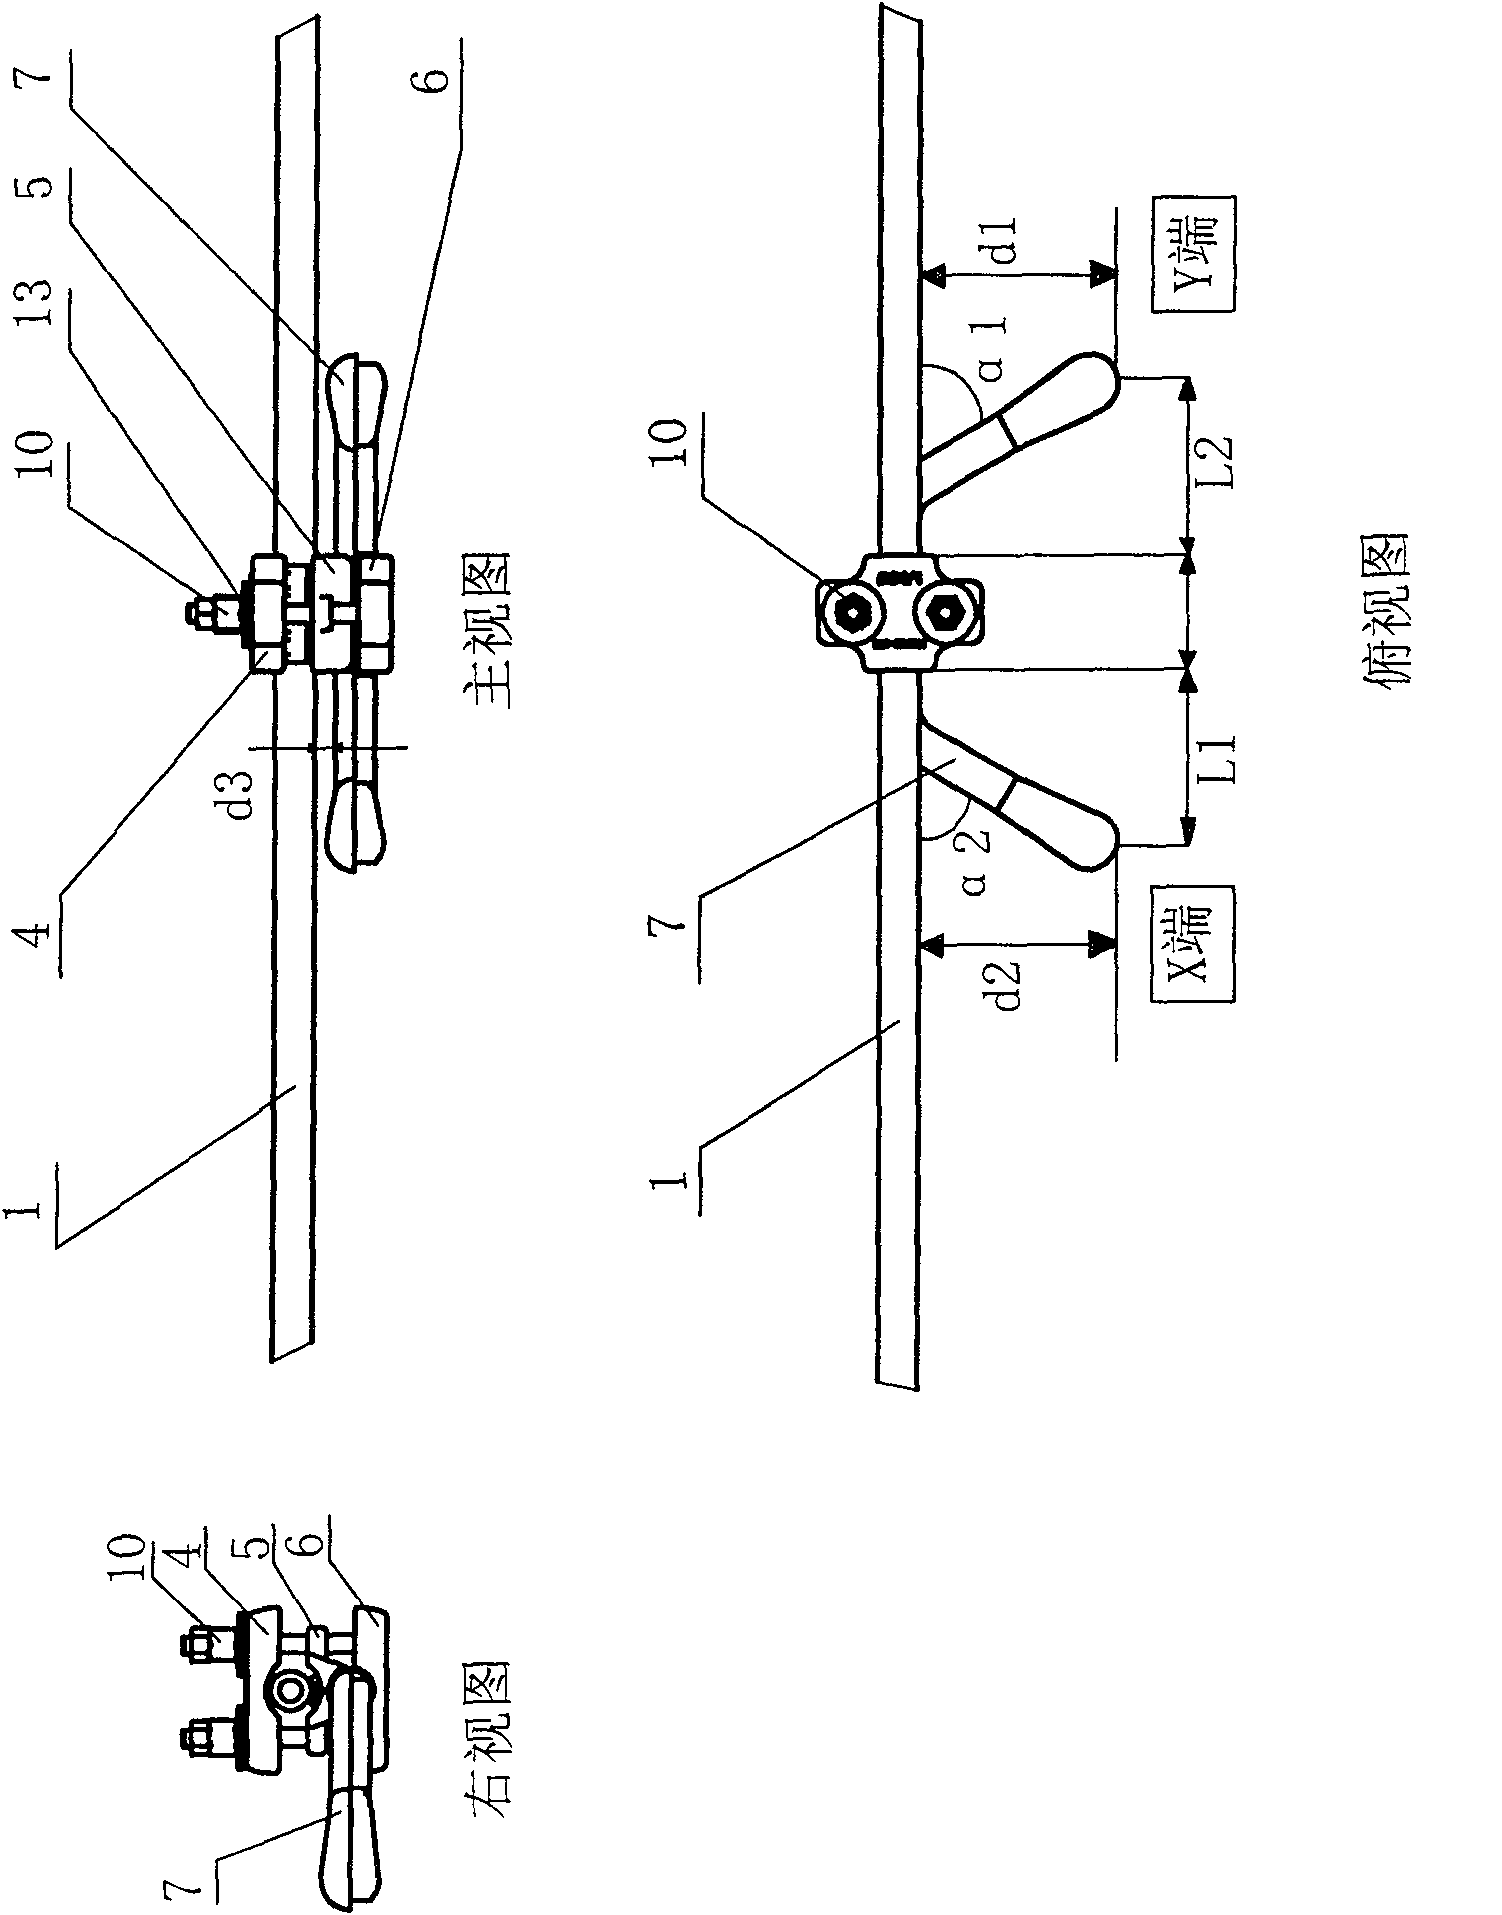 Arc-proof stabbing gold tool for preventing aerial insulated wire being broken by lightning stroke